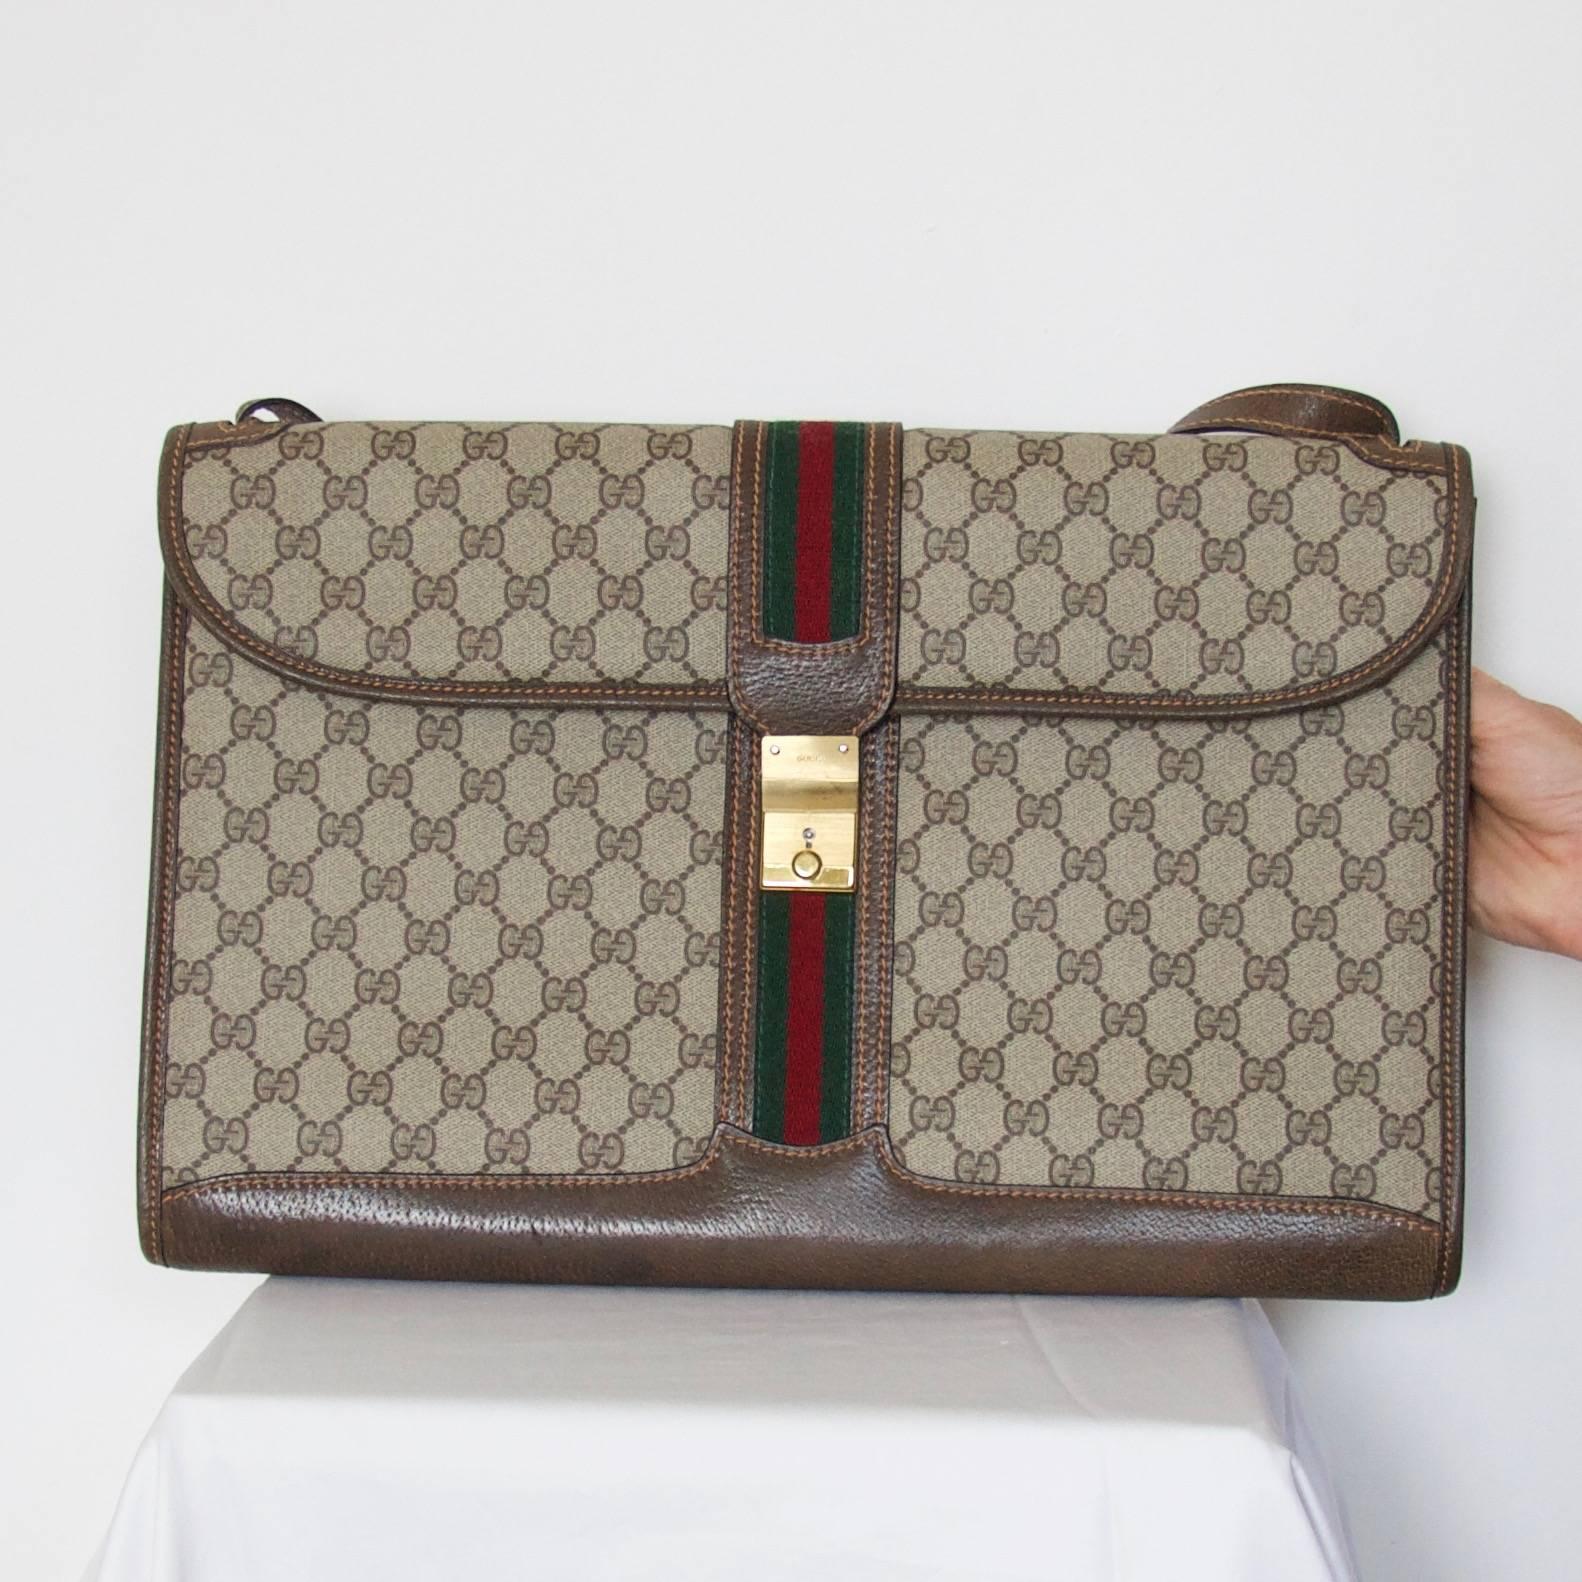 Excellent vintage condition shoulder bag, ideal for thin laptop / tablet.

Gucci embossed canvas with leather trim and zipped internal pocket. 
Pigskin lining, like new! Includes adjustable shoulder strap.

Made in Italy 1990's 
Serial number: 067
